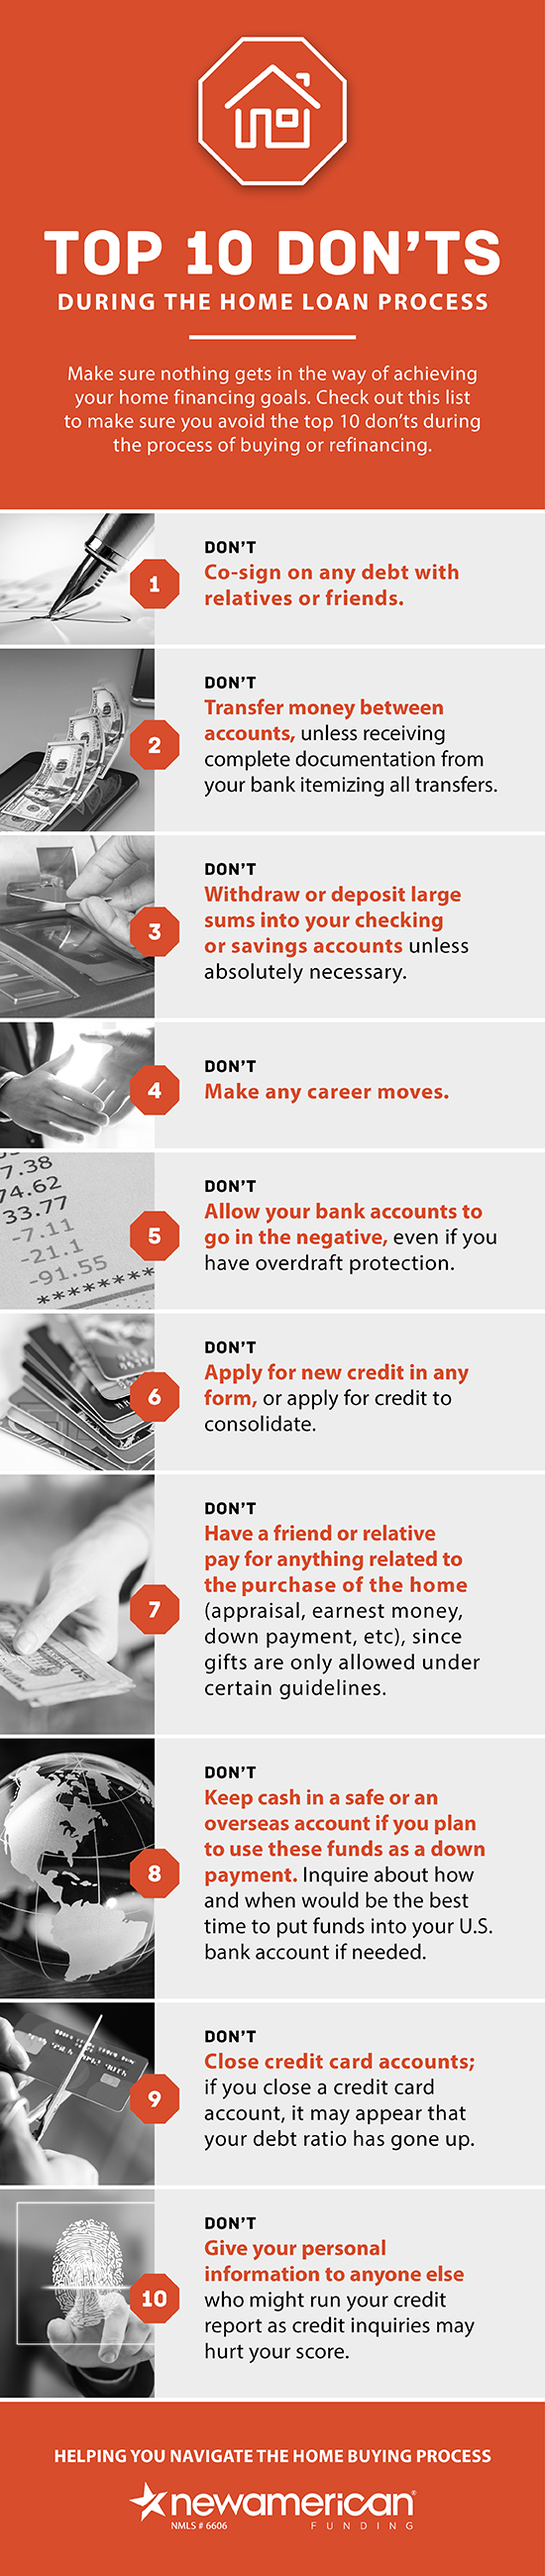 top 10 don'ts during the loan process